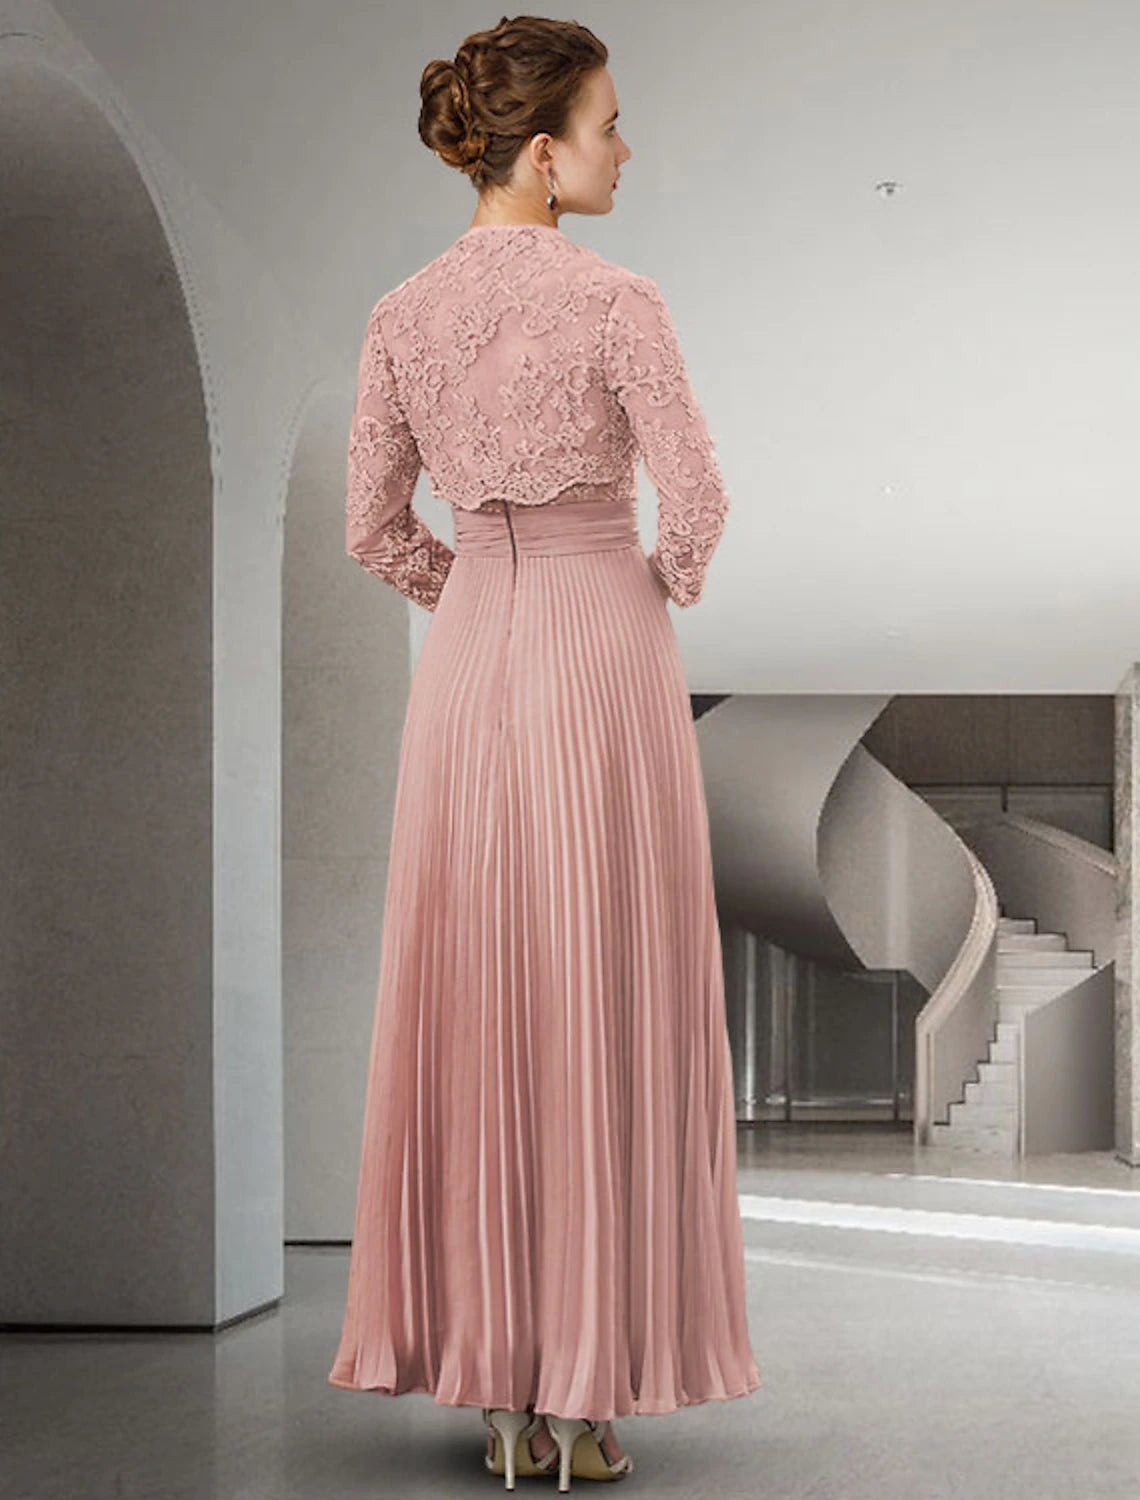 Two Piece A-Line Mother of the Bride Dress Elegant Sweetheart Ankle Length Chiffon Lace Long Sleeve with Jacket Wrap Included Pleats Appliques